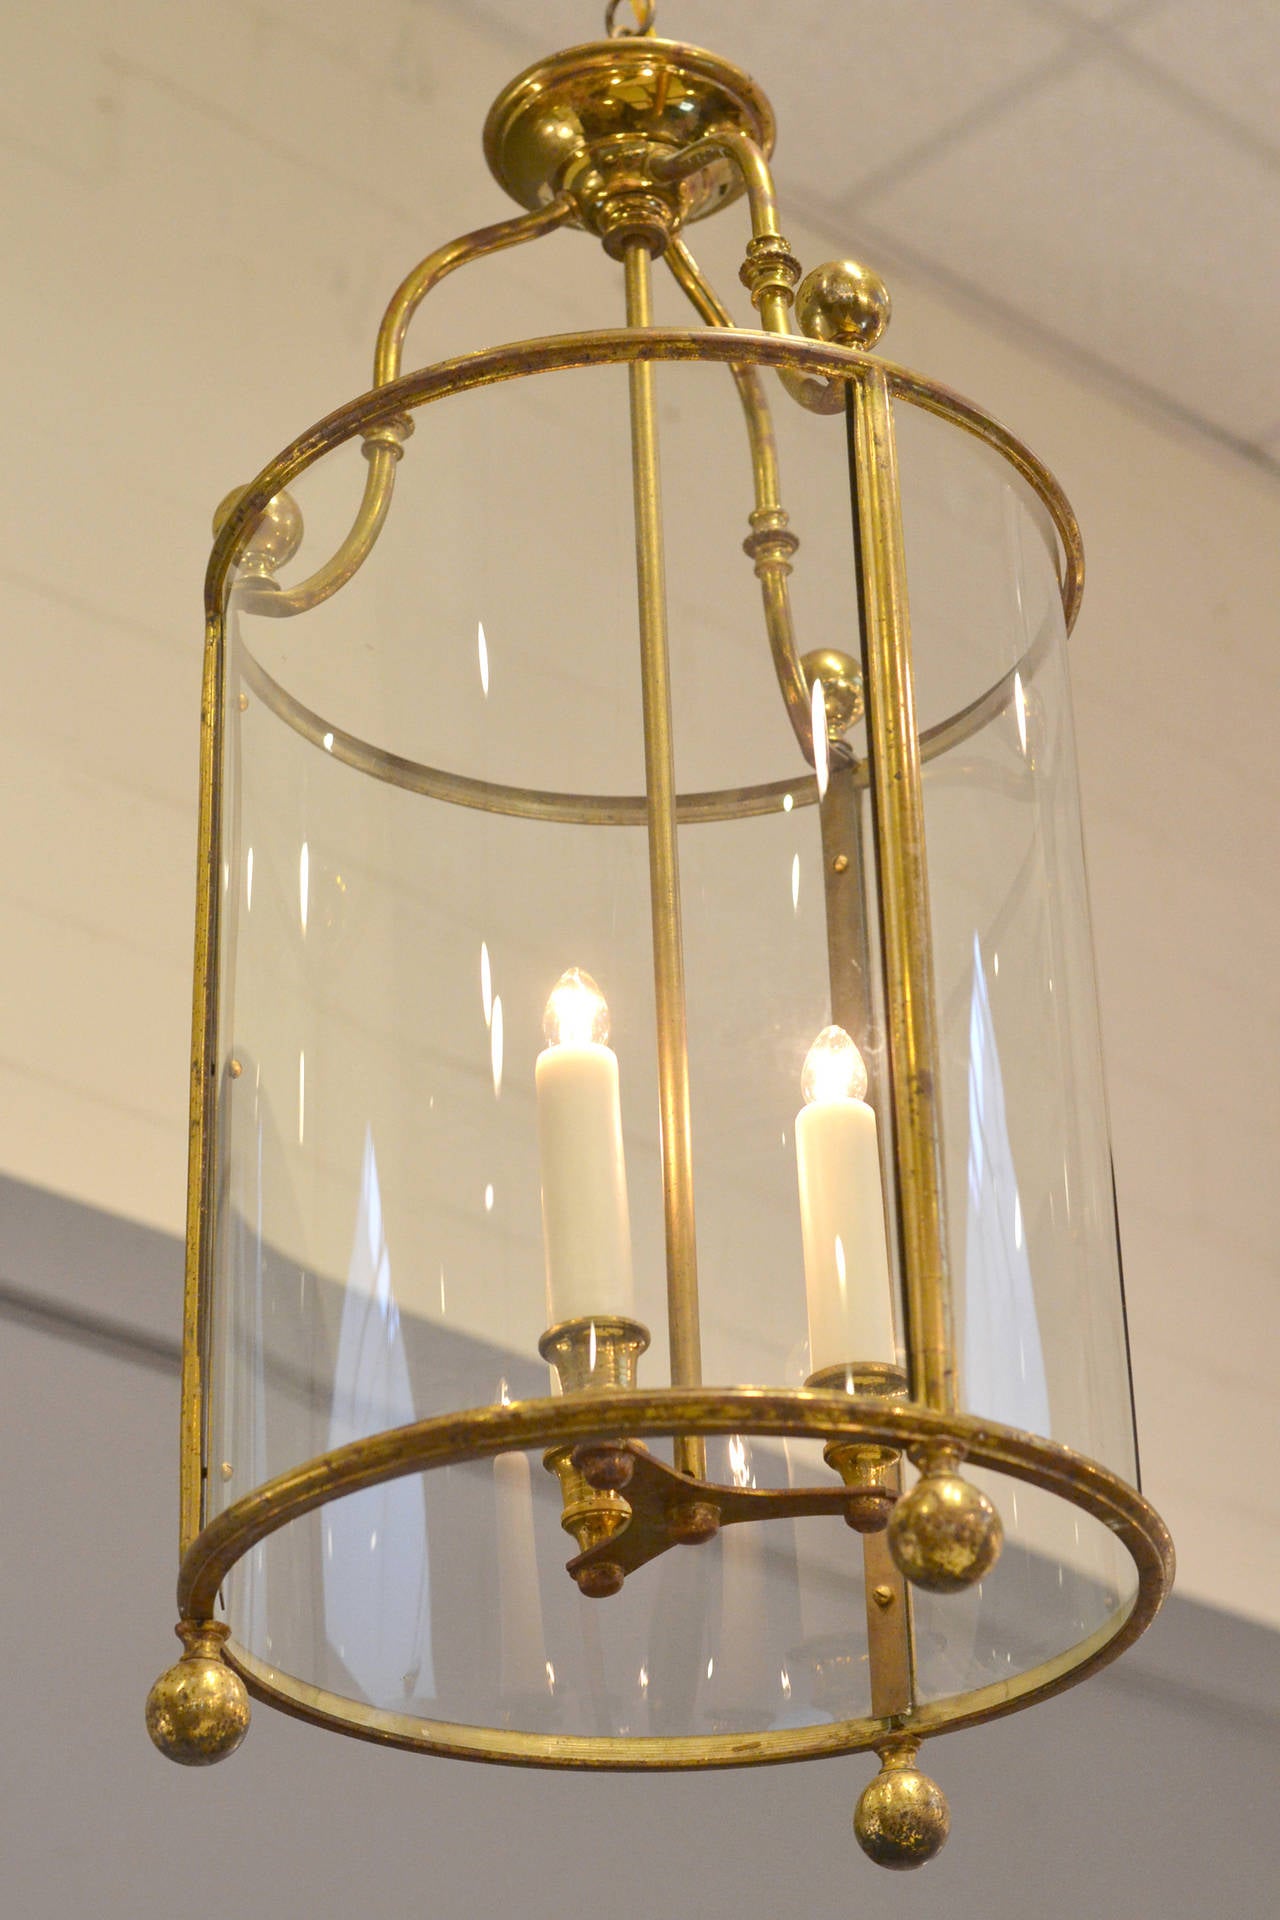 French antique lantern in brass and glass, electrified with a three candelabrum cluster, rewired for the US. Height with included chain and canopy is 50 in.